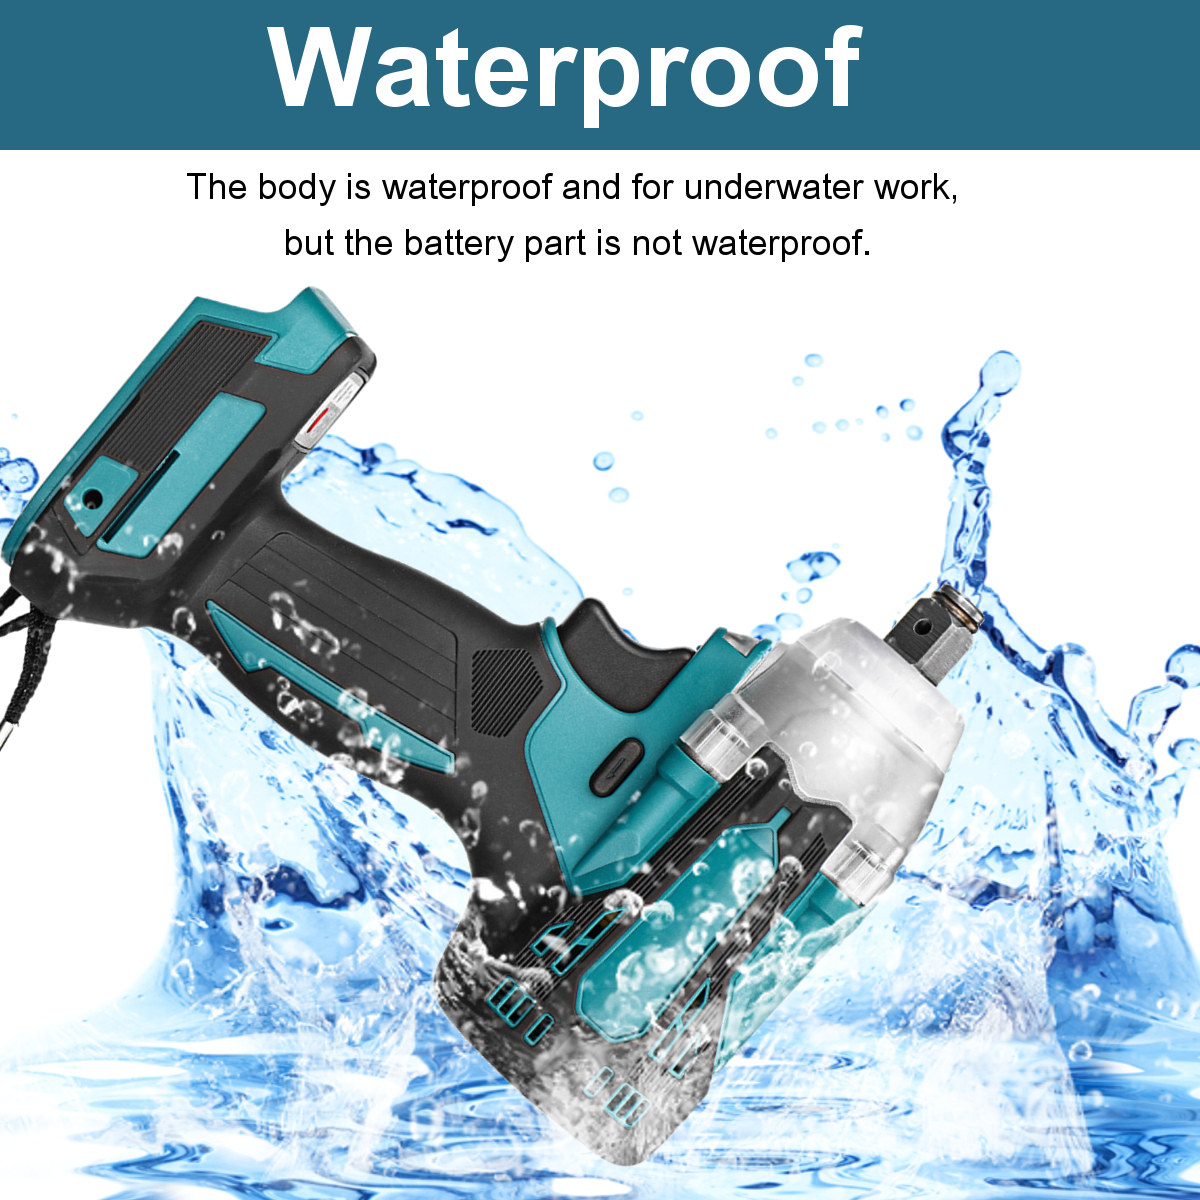 DTW300-2-in1-18V-800Nm-Li-Ion-Brushless-Cordless-12quot-Electric-Wrench-14quotScrewdriver-Drill-Repl-1854869-6